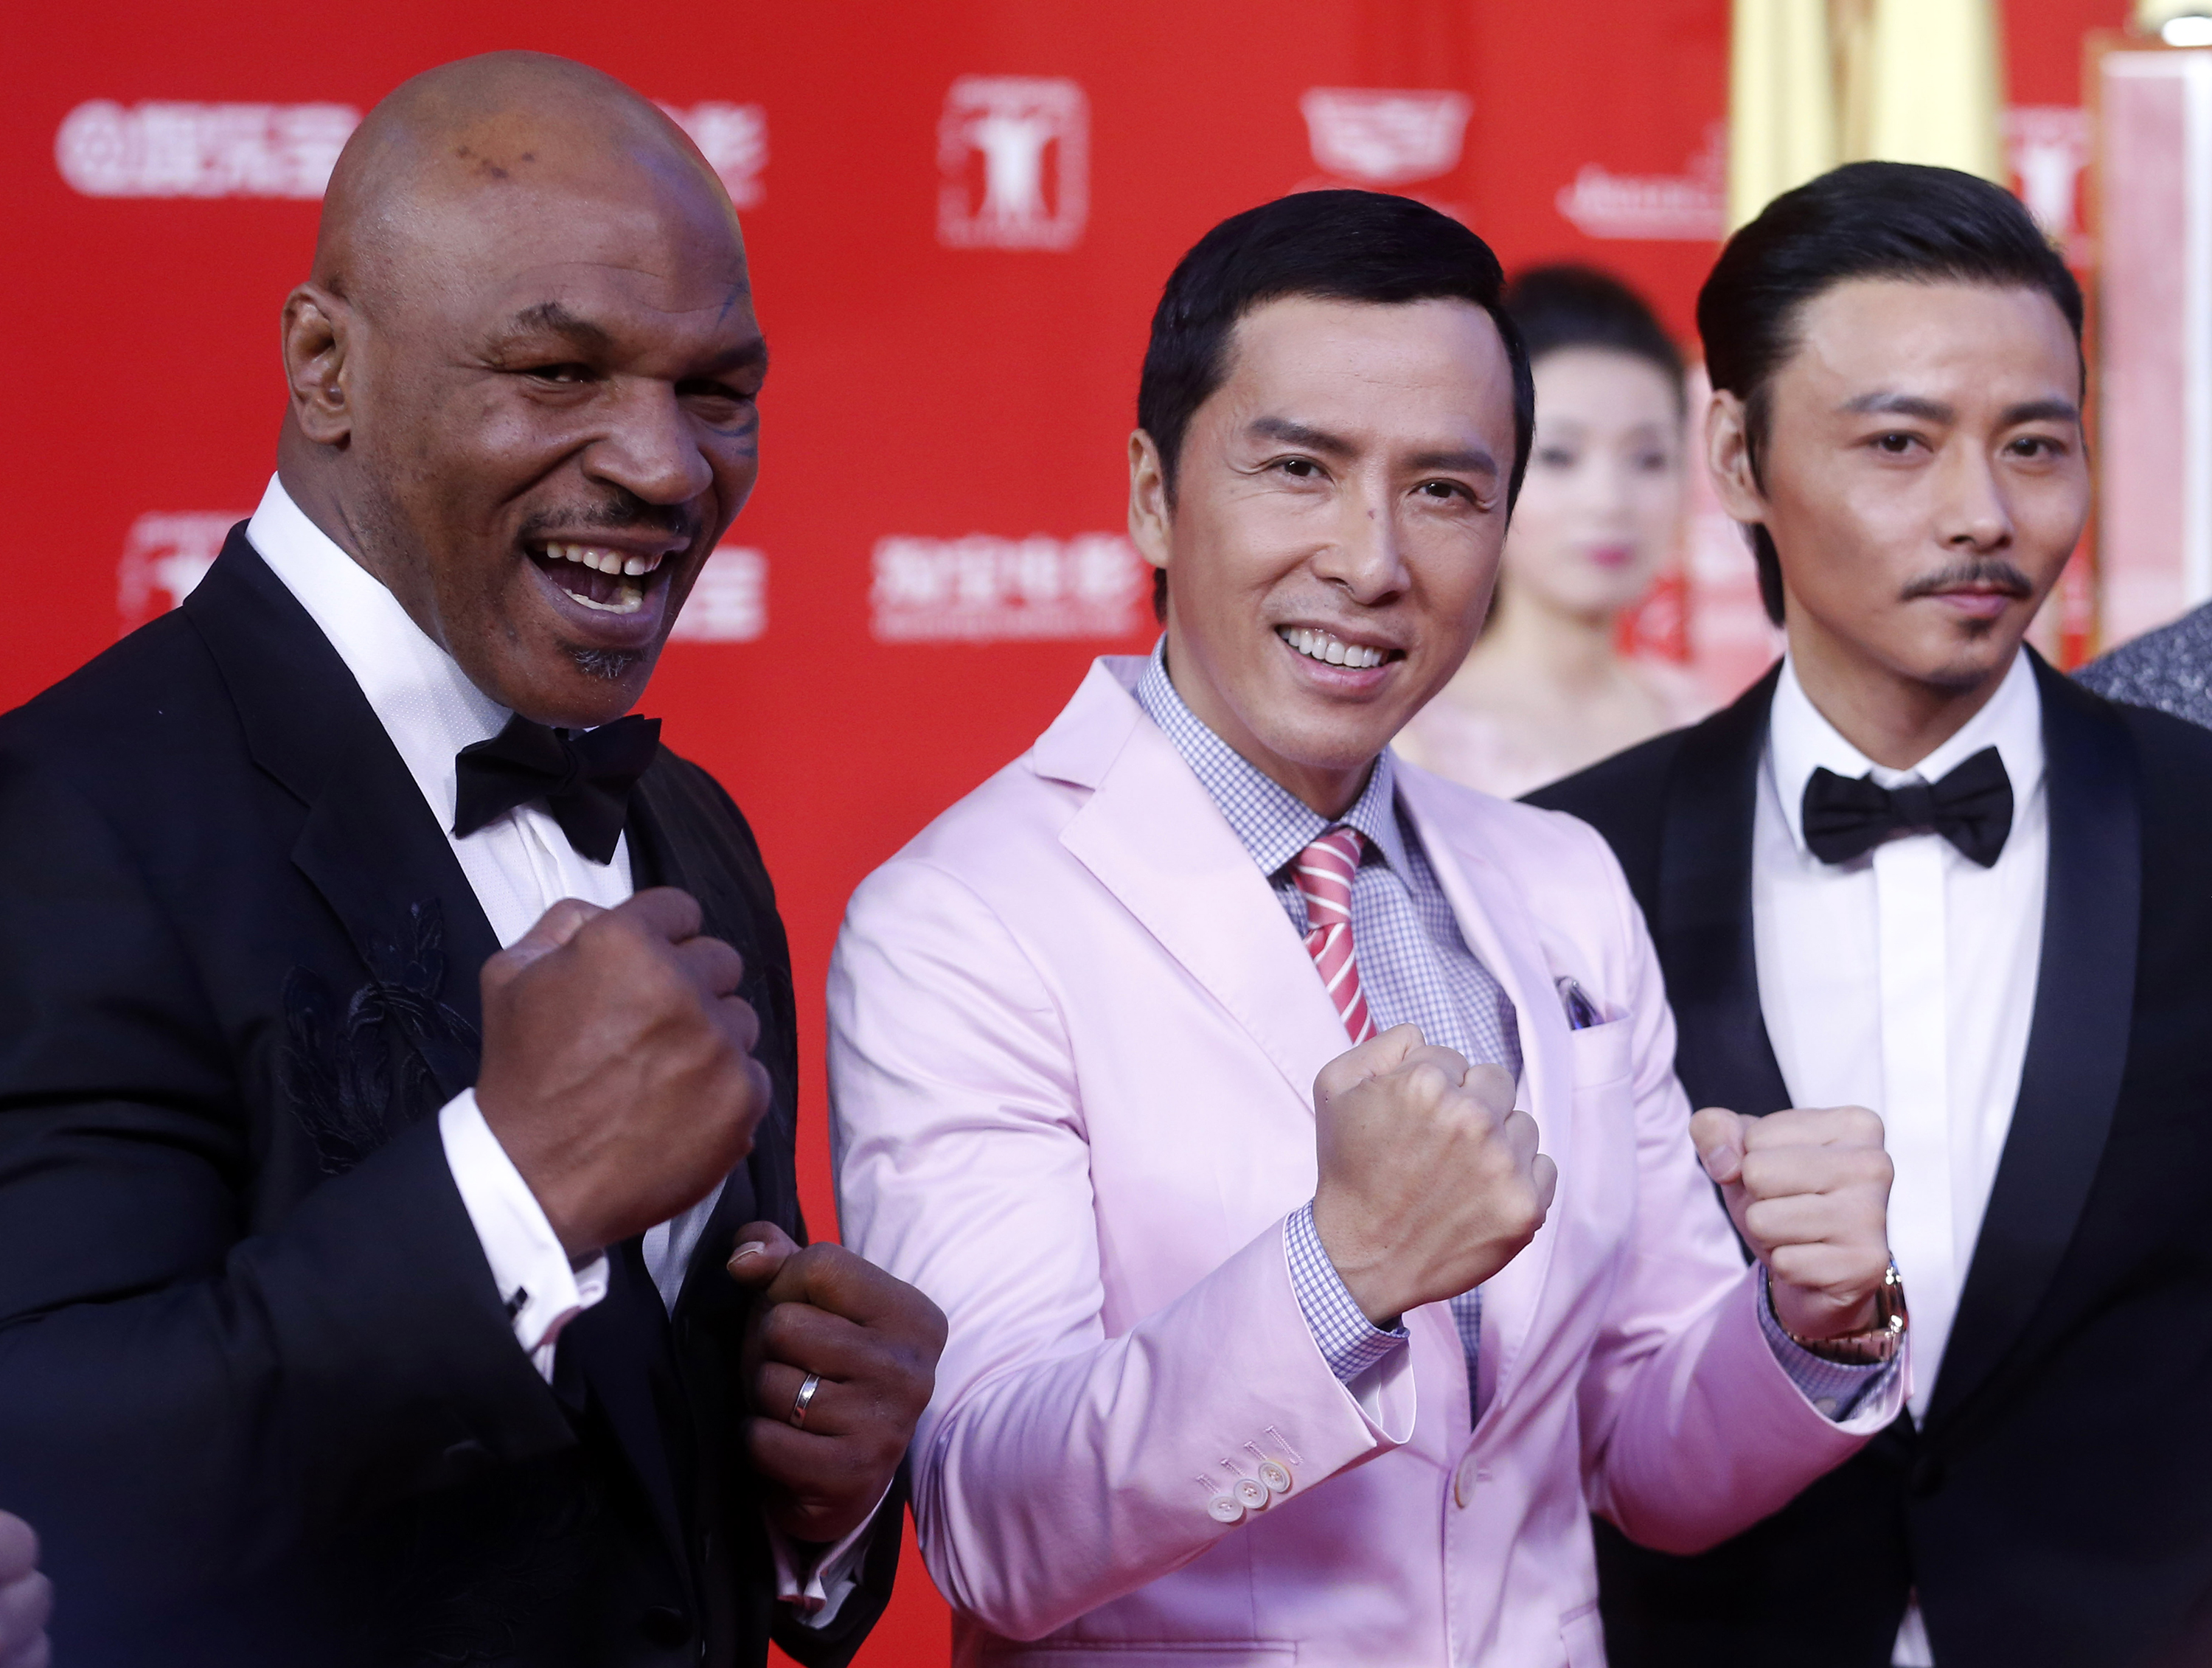 Leading cast members of the movie "Ip Man 3" including Donnie Yen (centre) and Mike Tyson at the 18th Shanghai International Film Festival last week. Photo: TNS